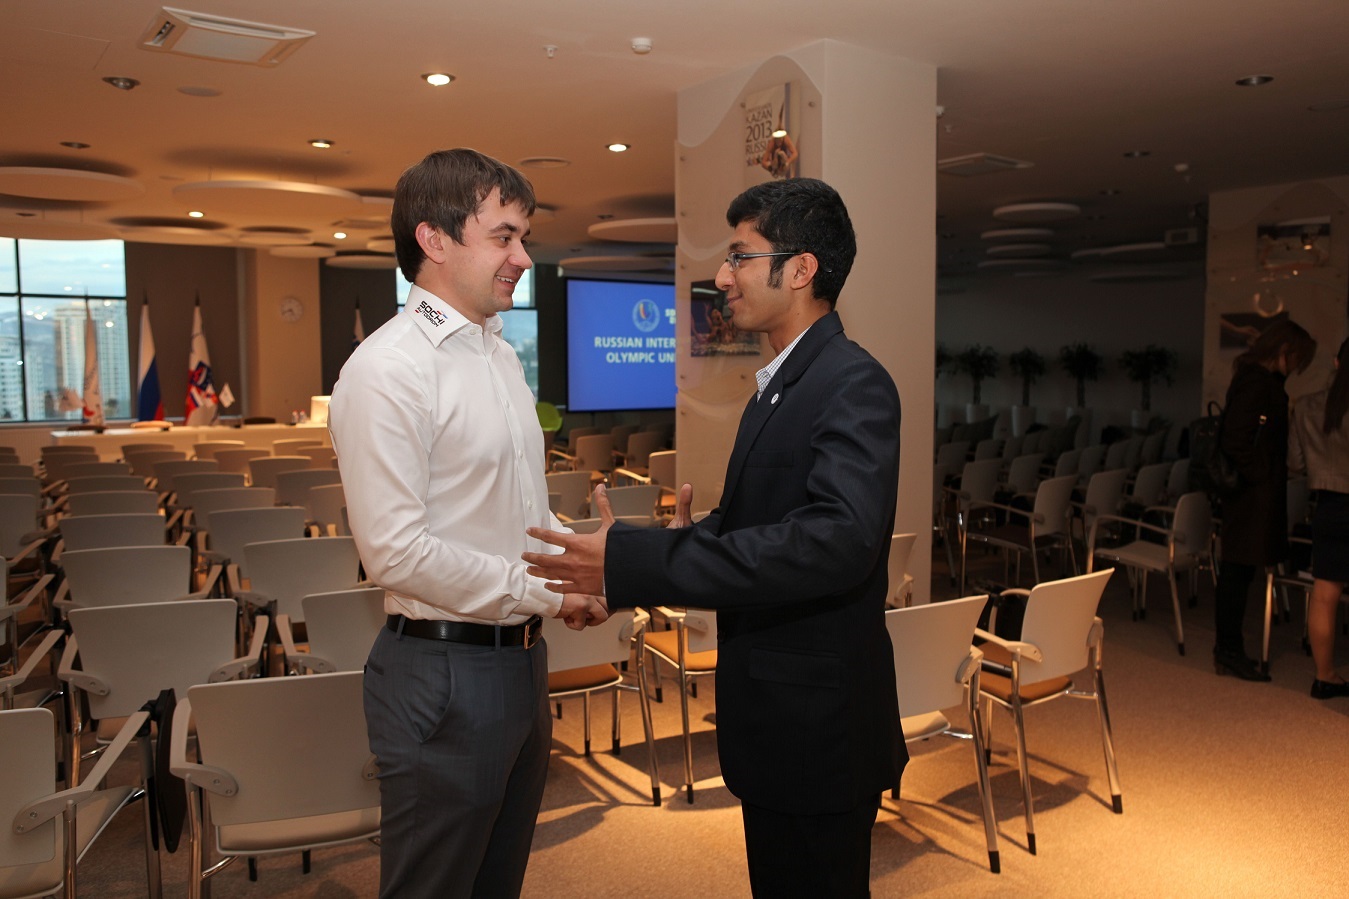 Sergei Vorobyev (left), deputy general director of Russian Grand Prix promoters Omega Centre, speaks with Parth Kalke (right), a RIOU MSA student ©RIOU